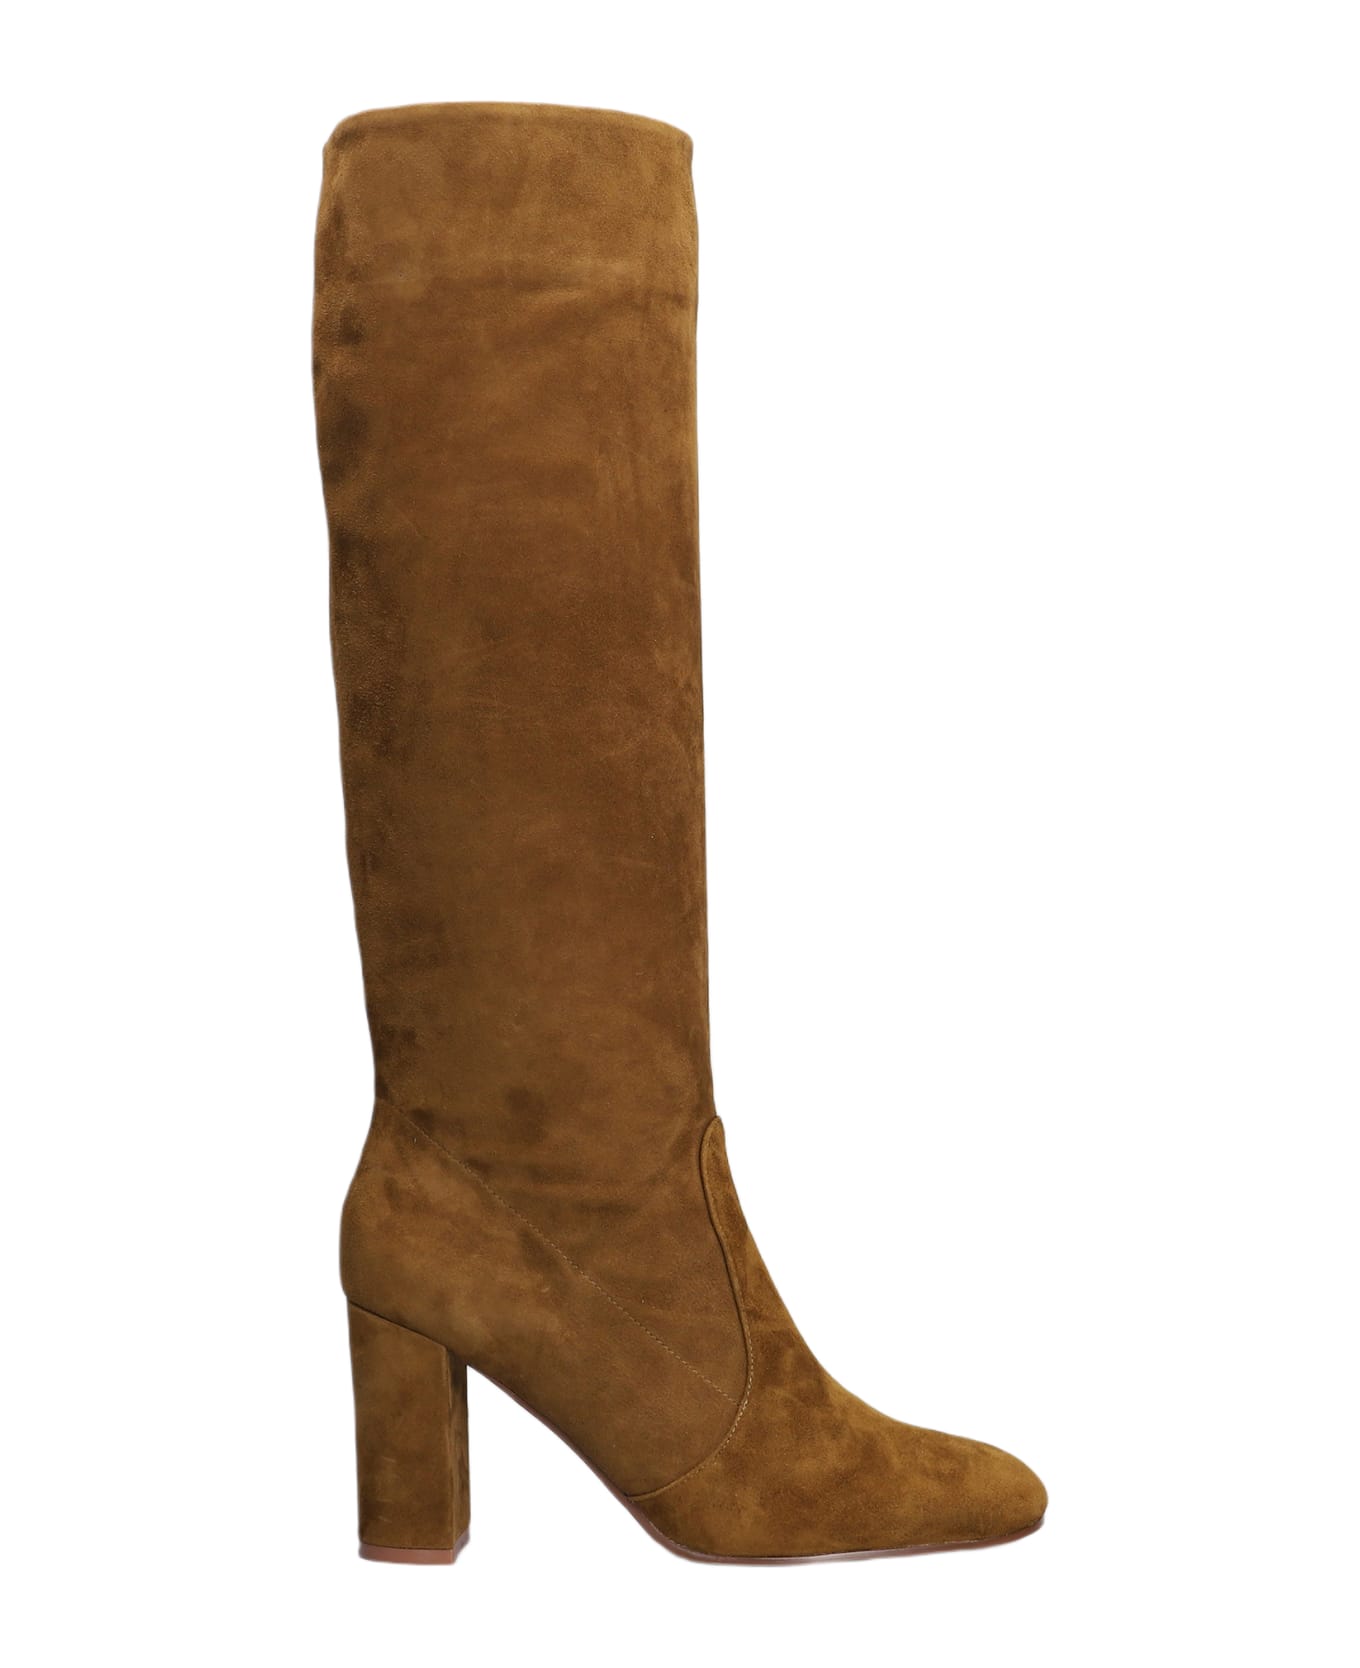 Lola Cruz High Heels Boots In Leather Color Suede - leather color